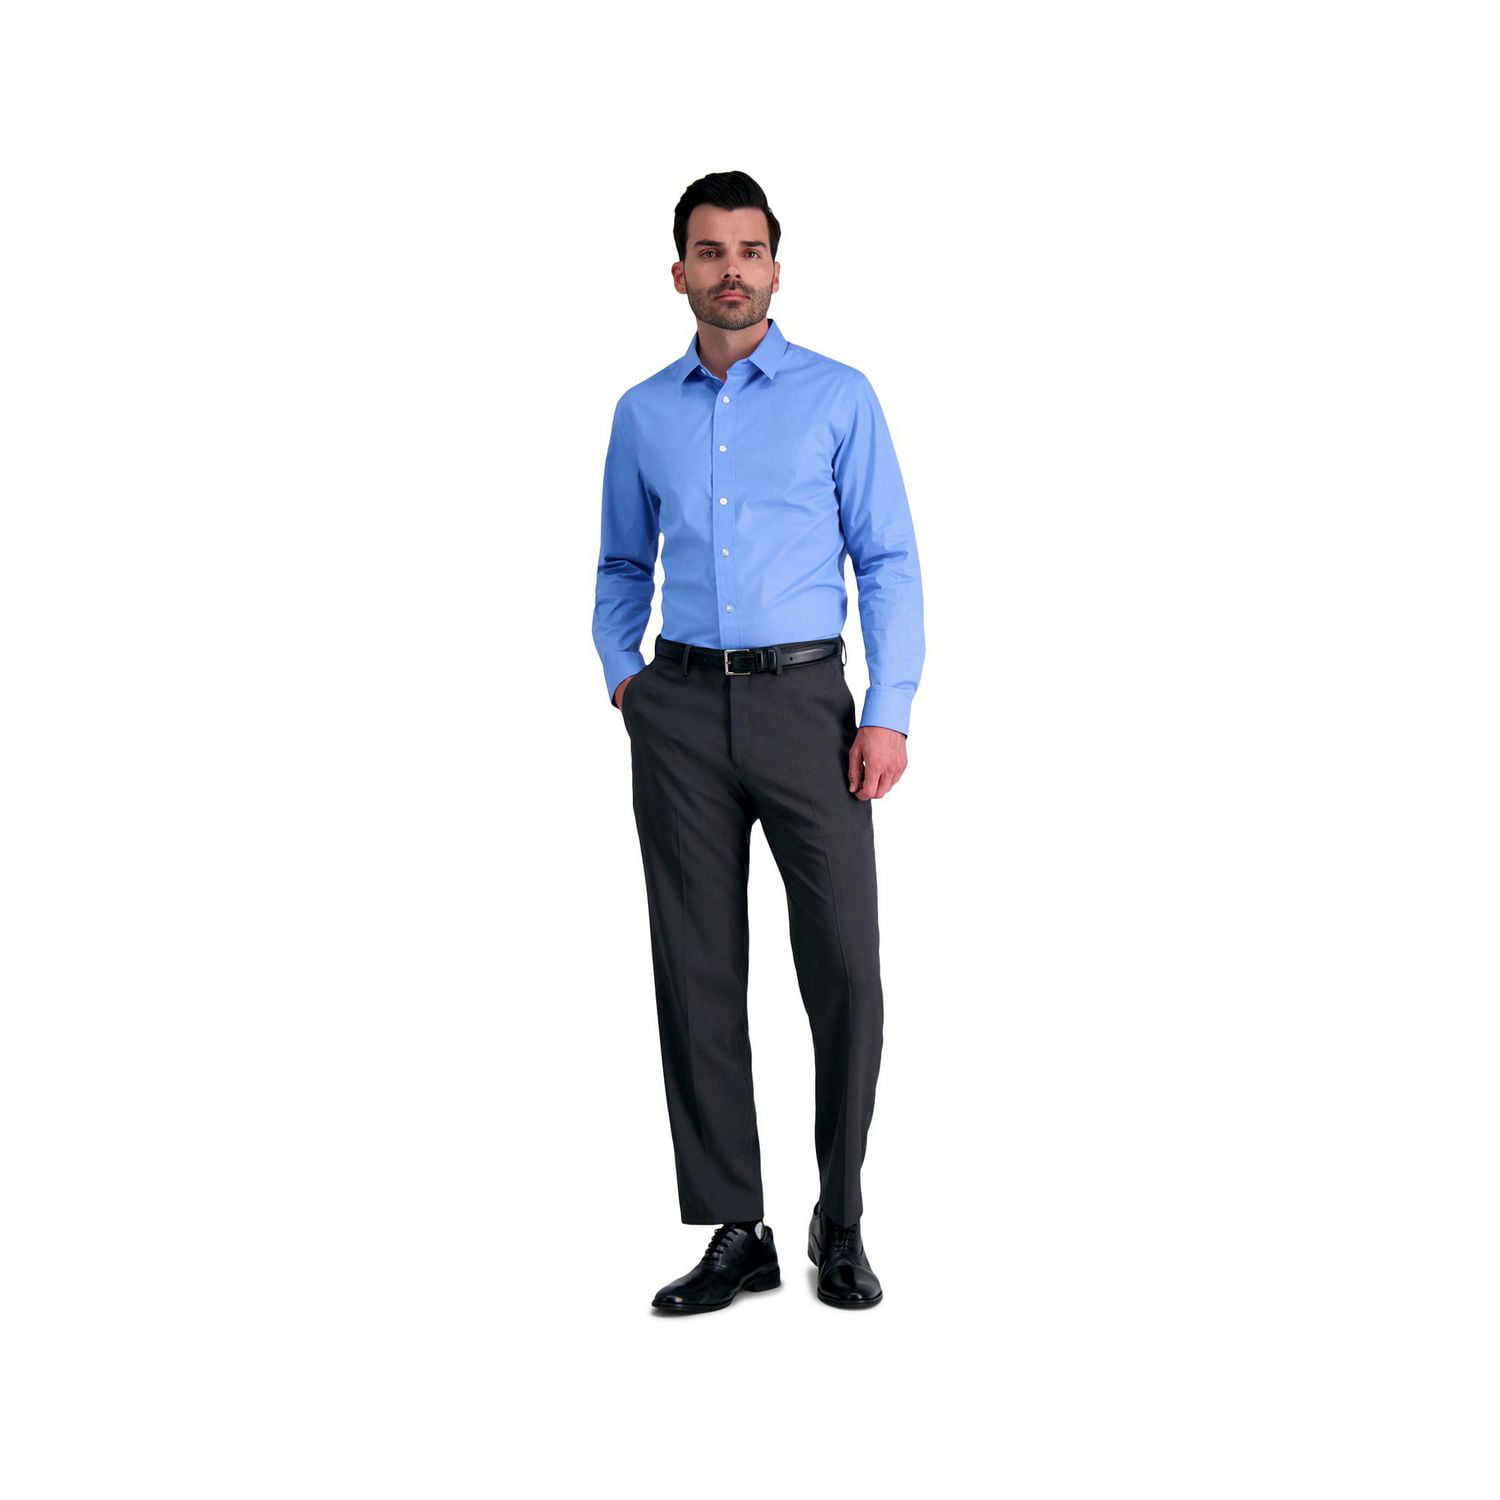 Business/Smart Casual: Workwear Pants for the Office - LIFE WITH JAZZ